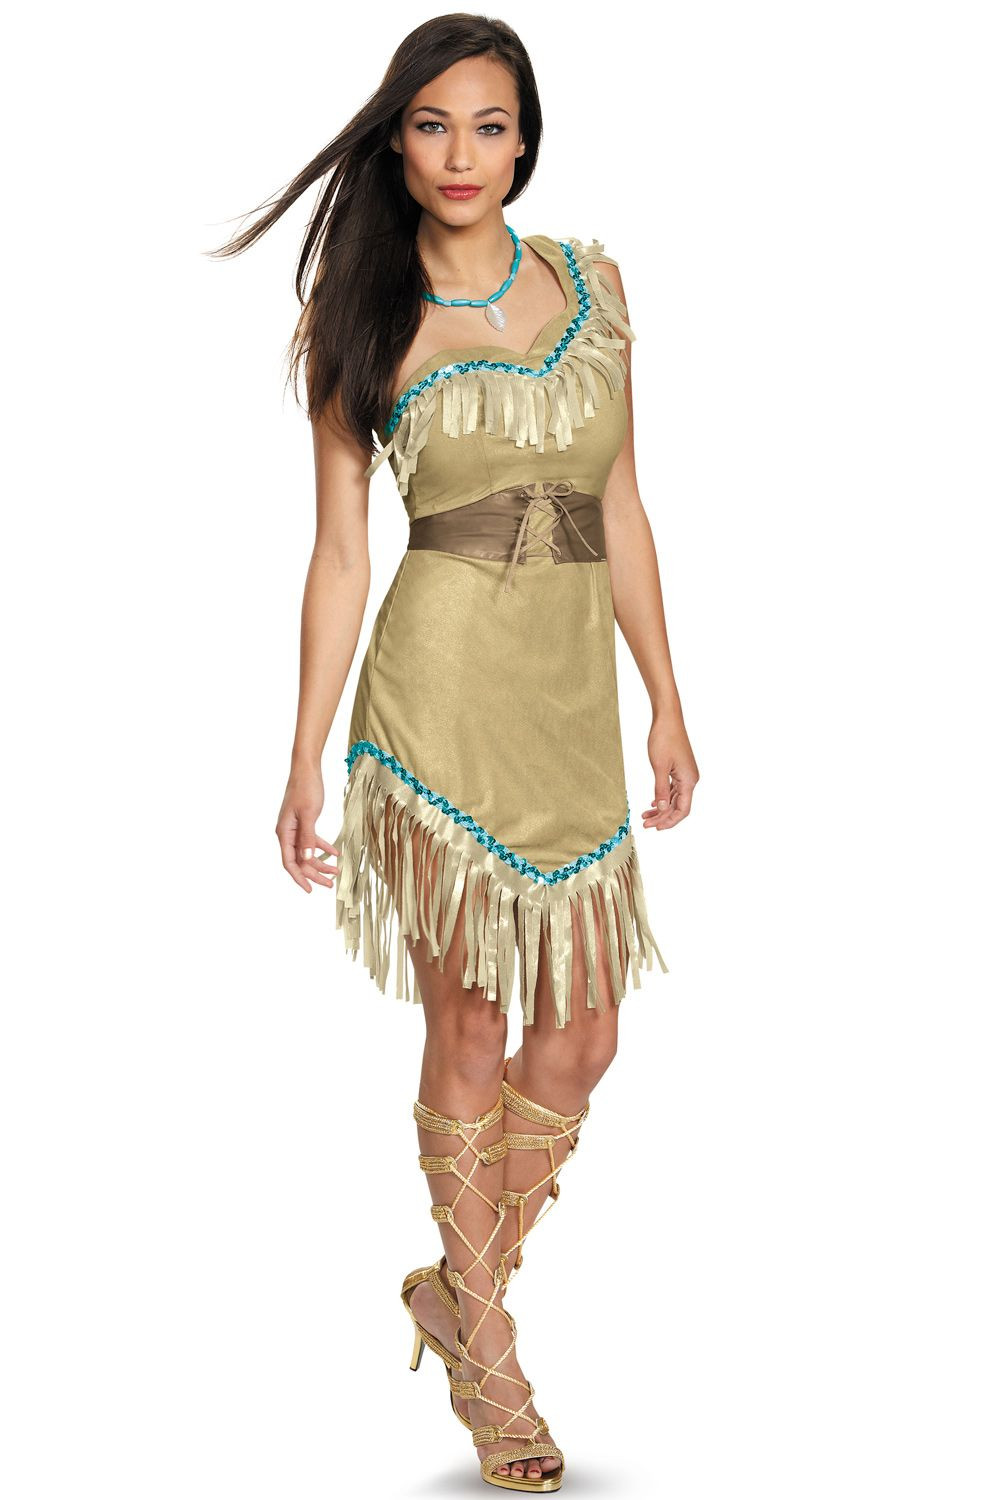 DIY Pocahontas Costume For Adults
 Pocahontas Deluxe Adult Costume